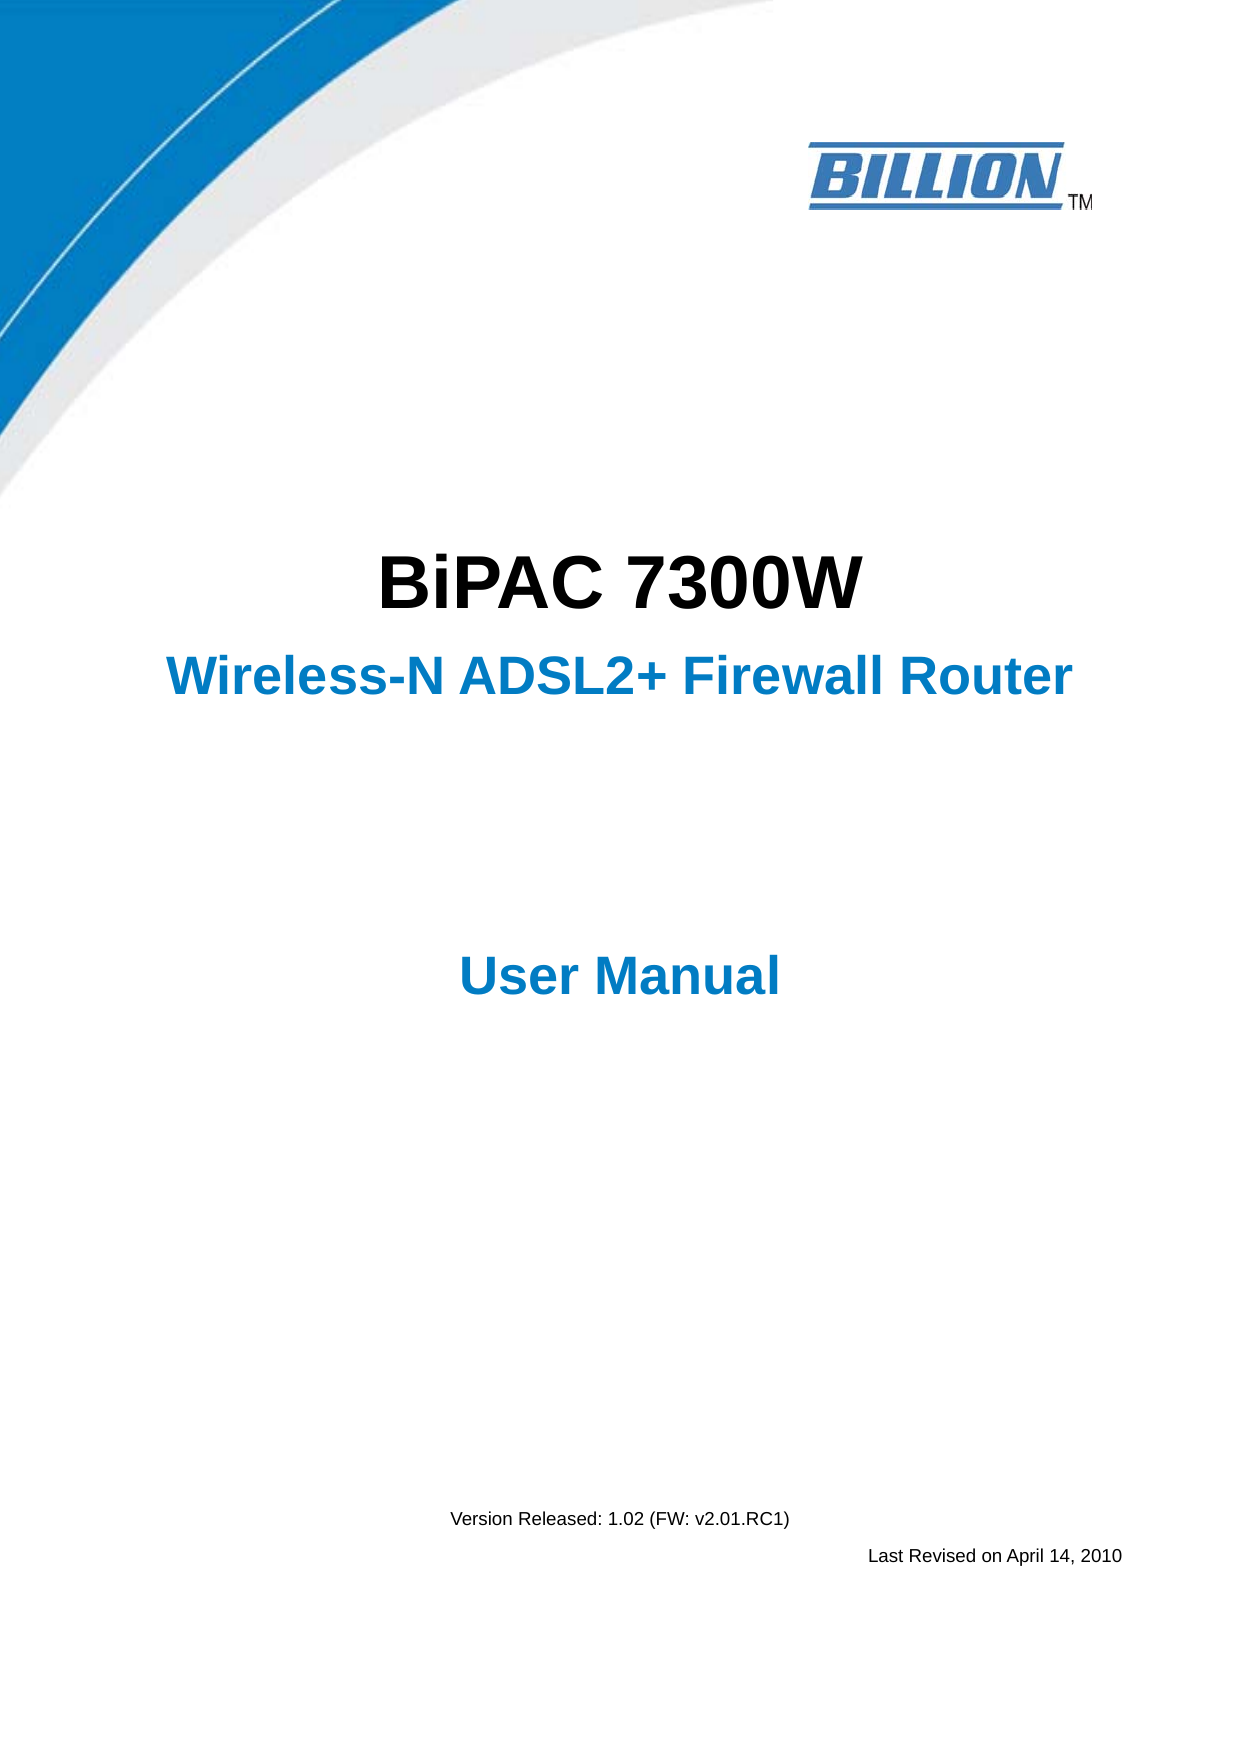       BiPAC 7300W Wireless-N ADSL2+ Firewall Router   User Manual              Version Released: 1.02 (FW: v2.01.RC1)                            Last Revised on April 14, 2010 